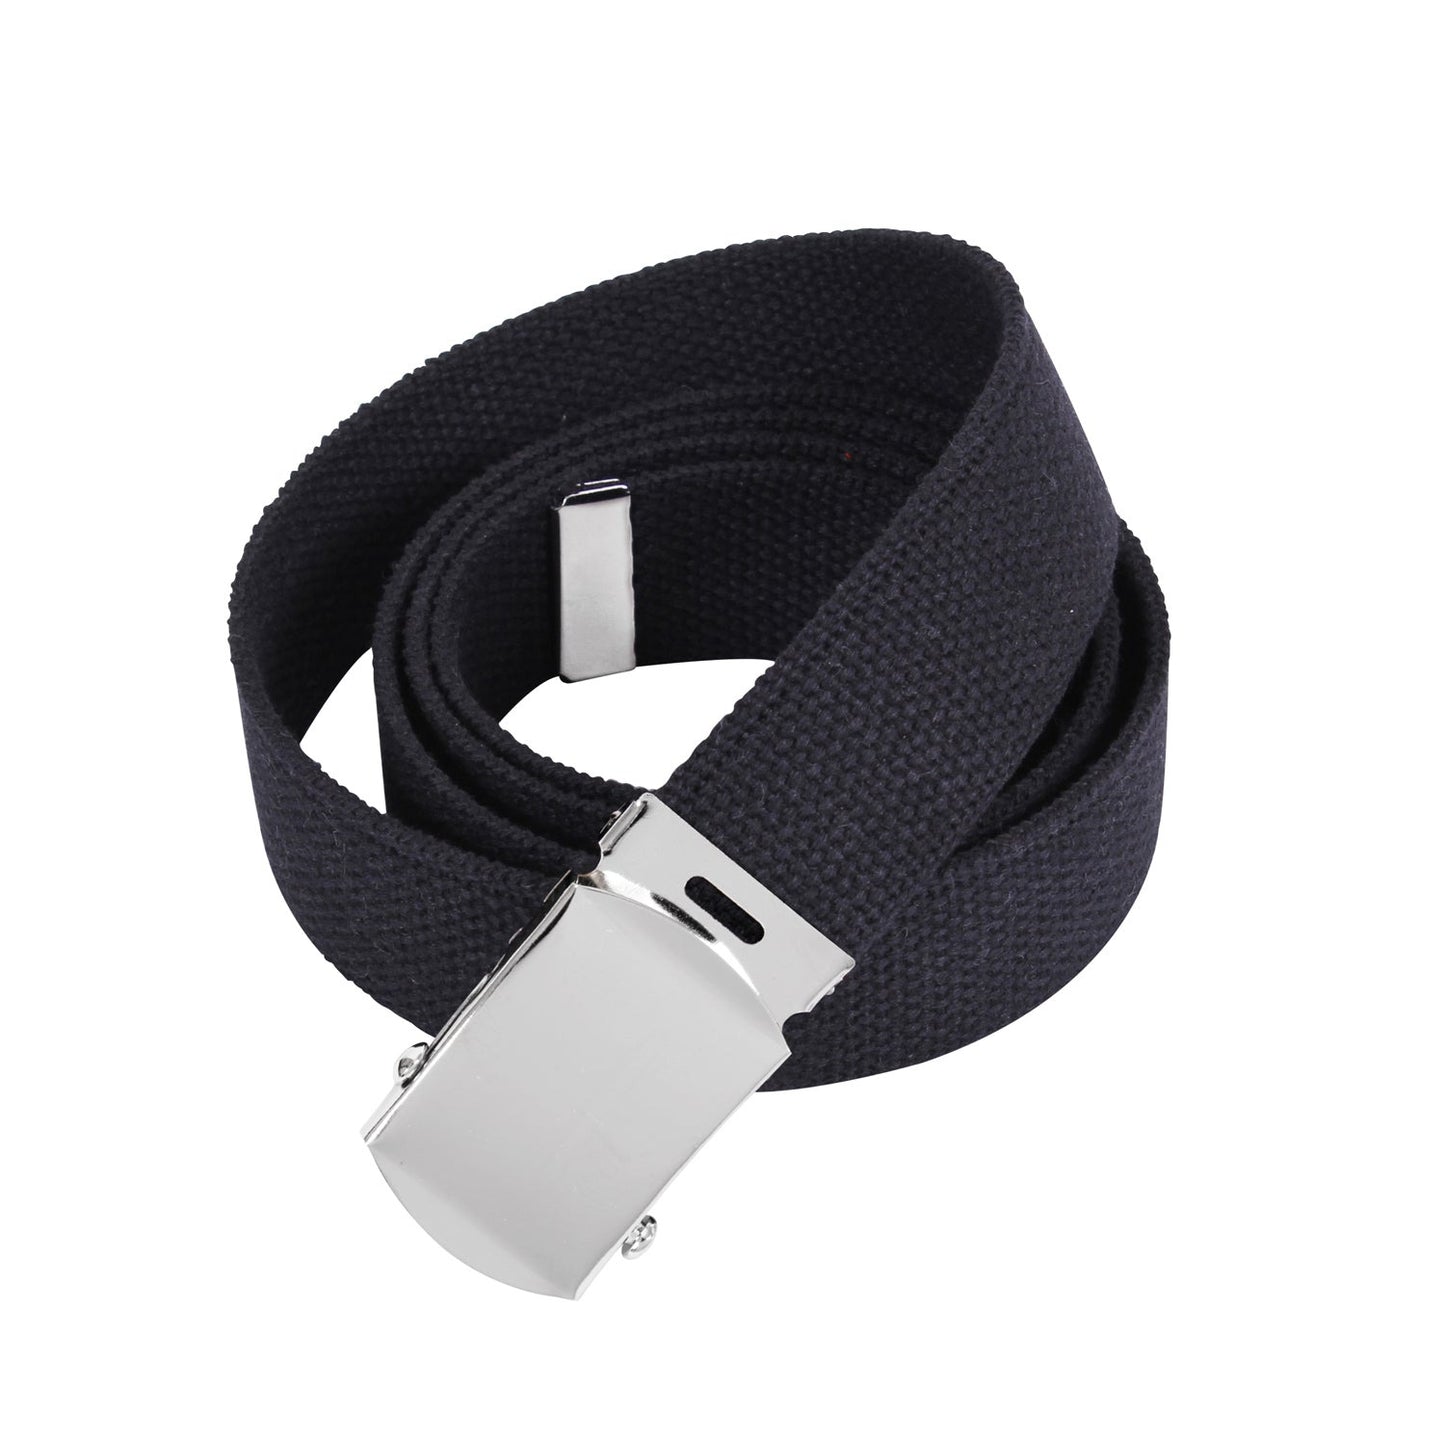 Long-lasting and fully customizable, Rothco's Military Web Belts can easily be cut for the perfect fit (up to 54 inches long). The military-grade cotton material is available in over a dozen belt and buckle options. Additional lengths (44", 64" and 74") are also available, see matching items below. 